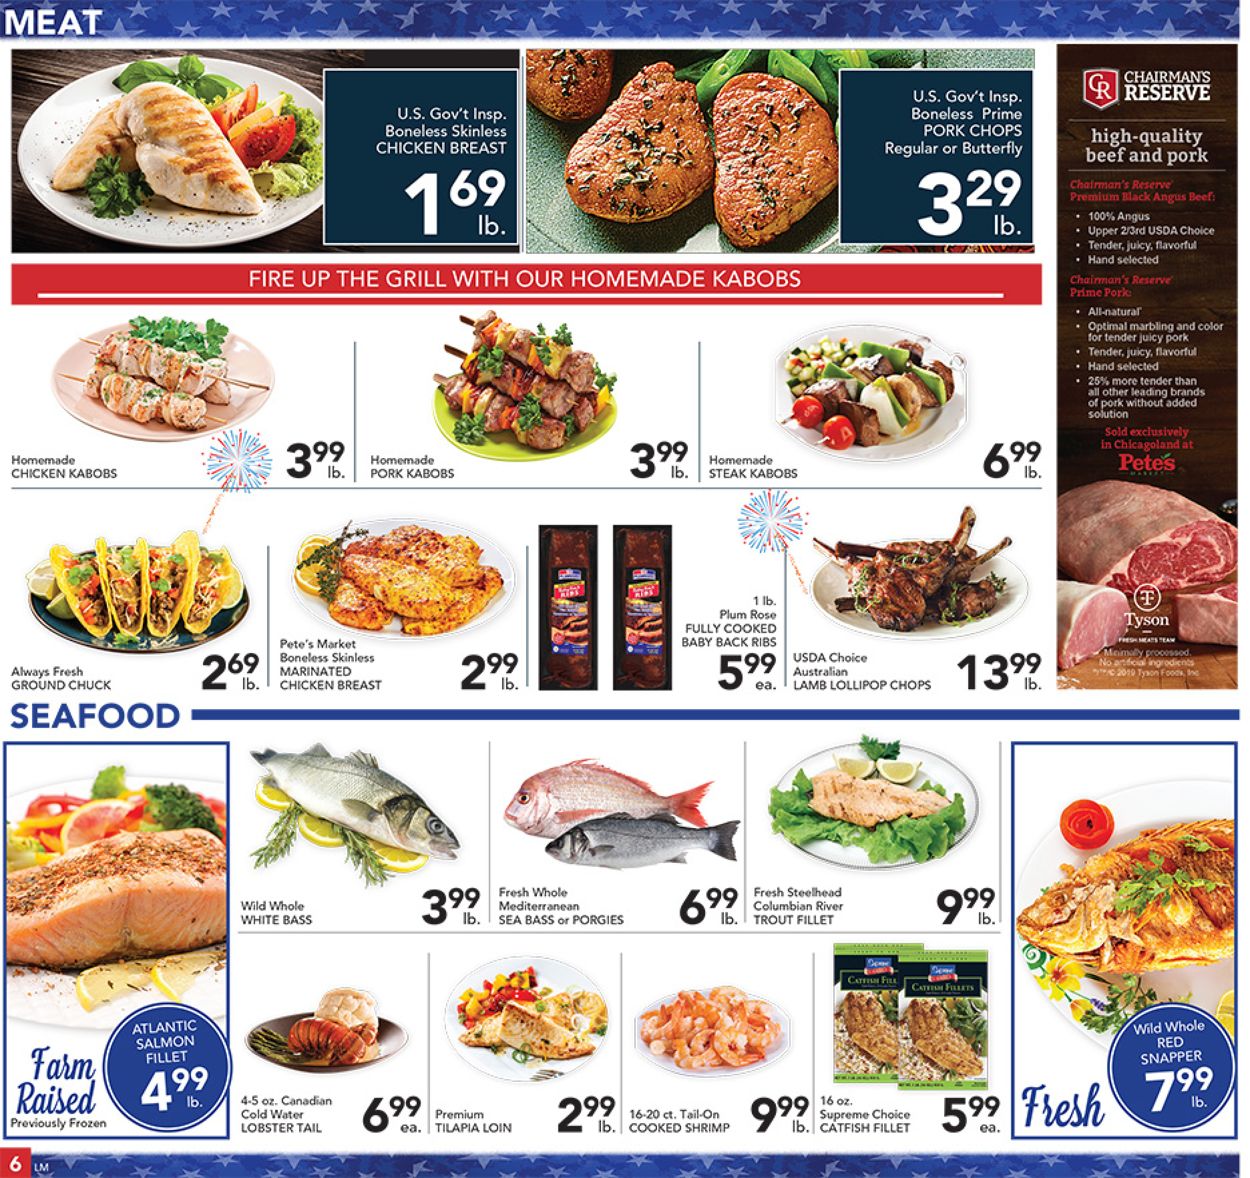 Pete's Fresh Market Ad from 07/01/2020